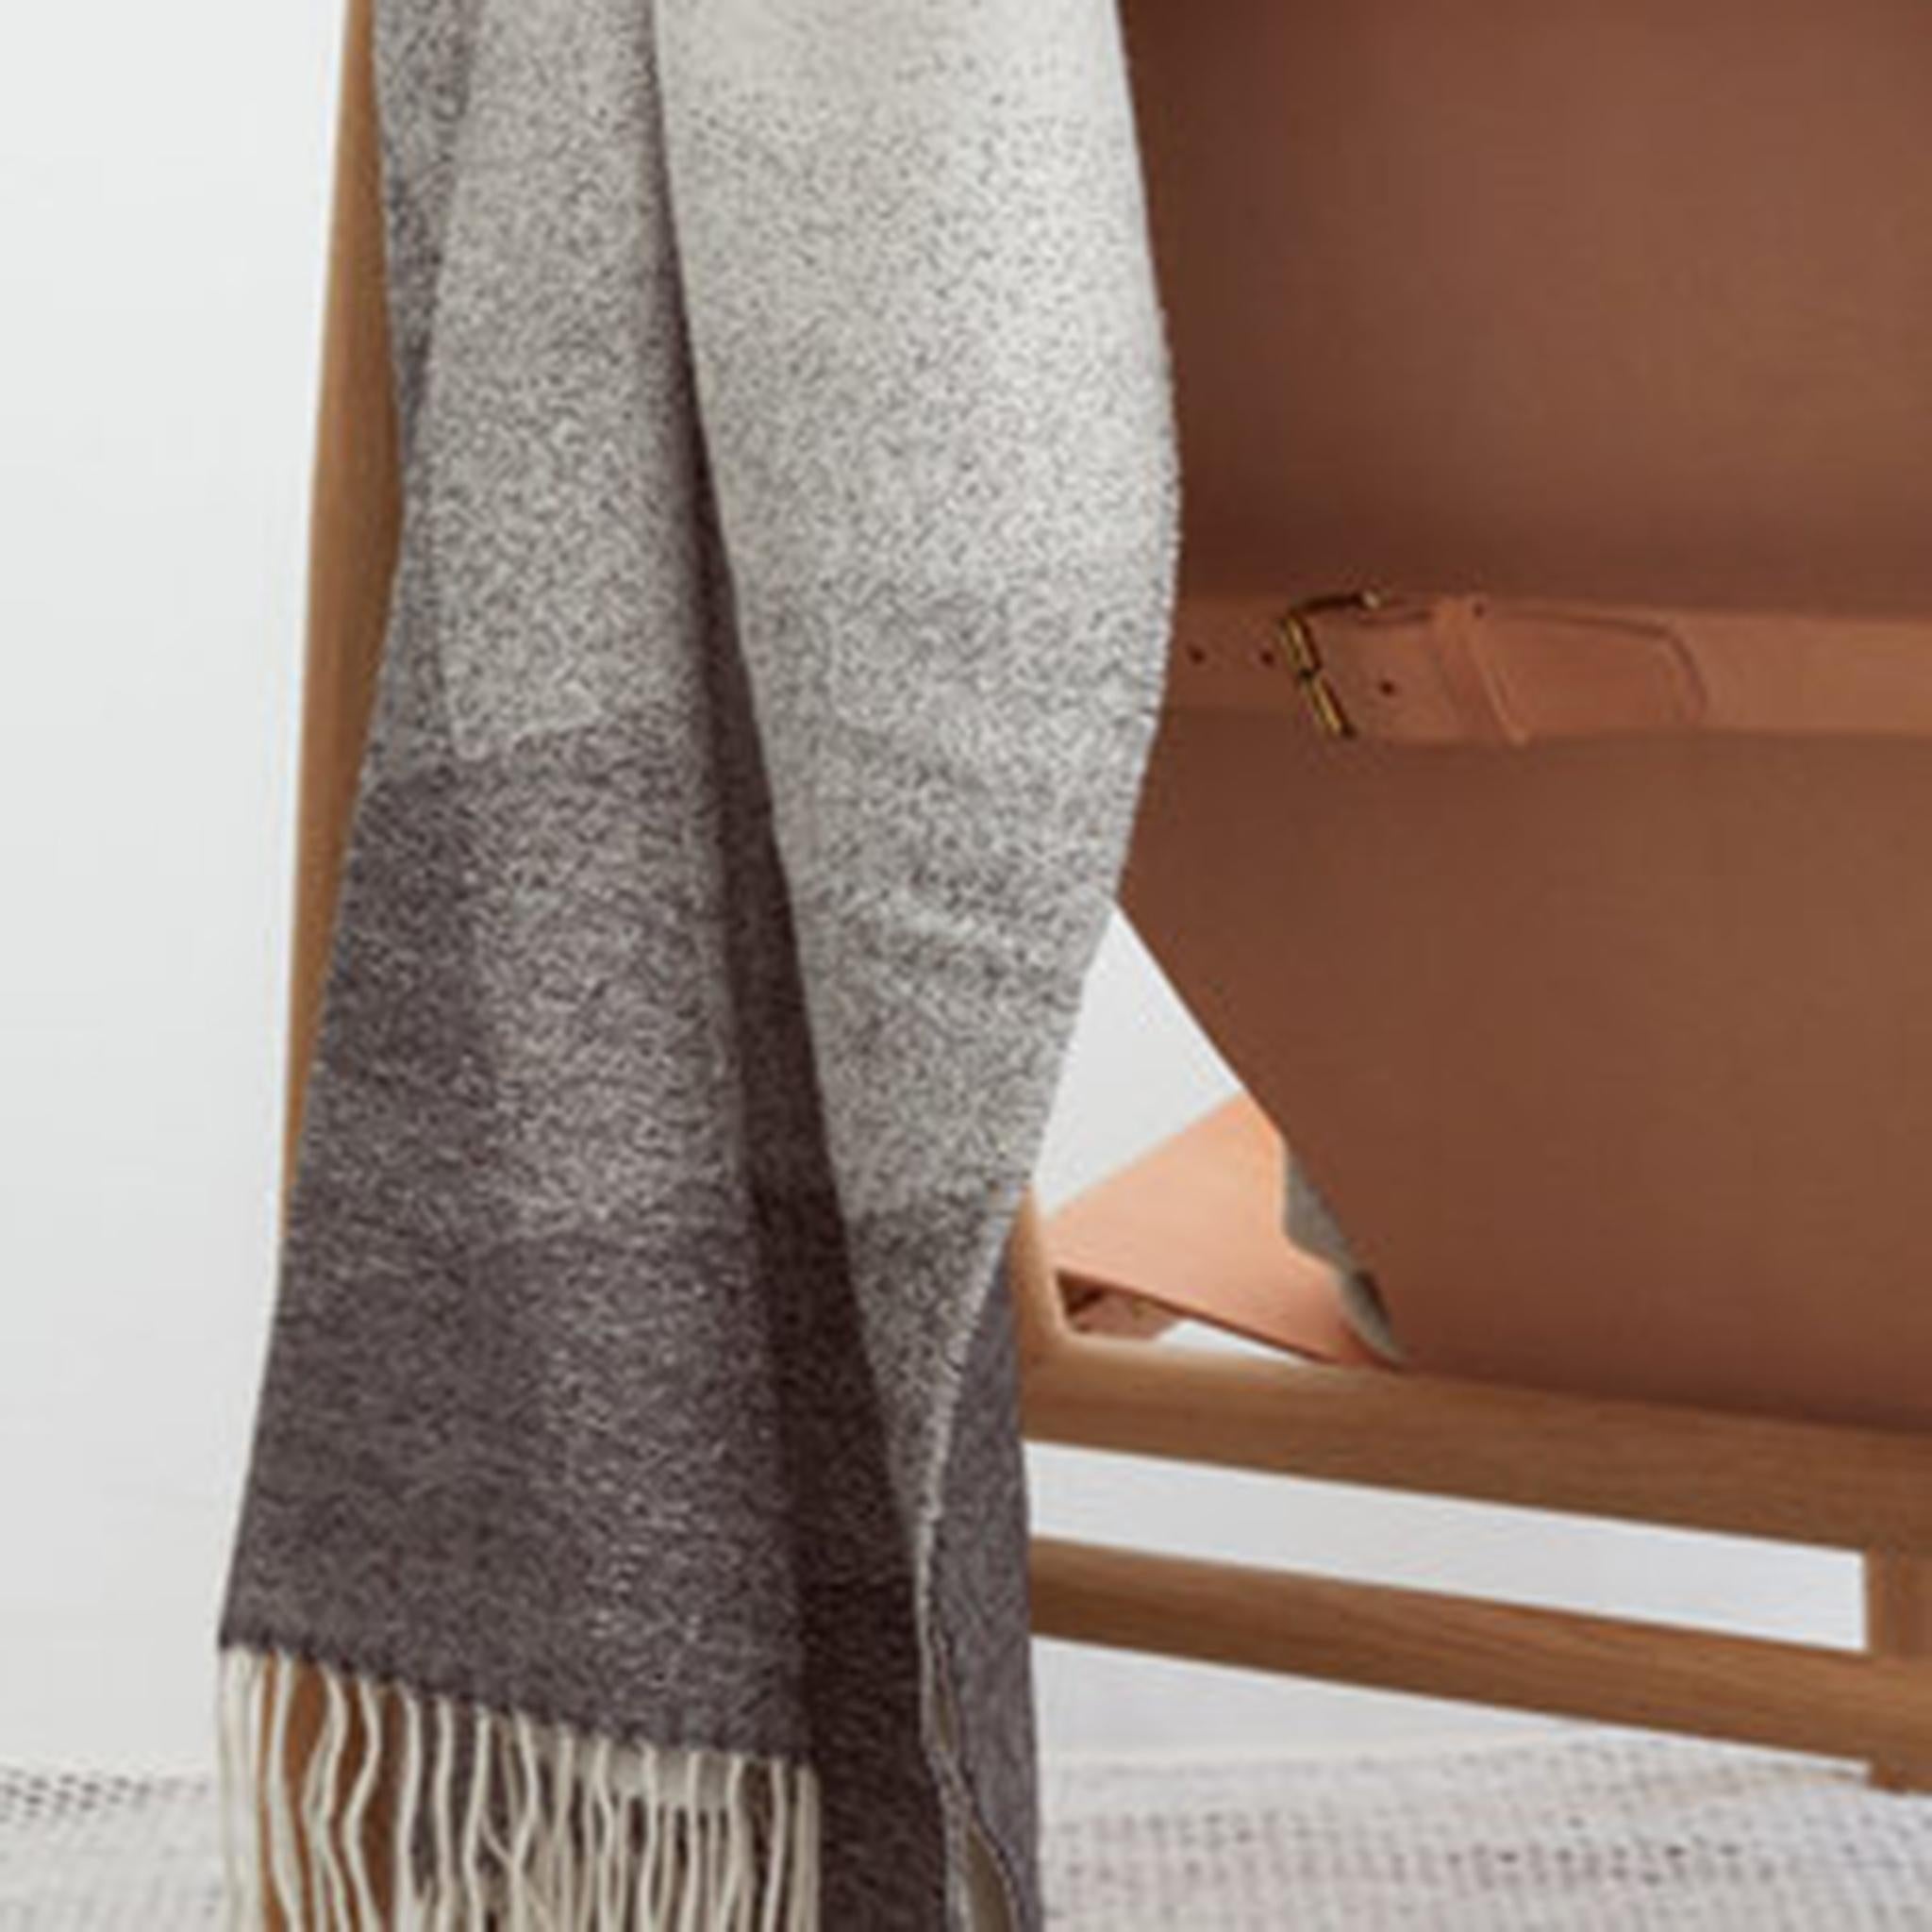 About

The Luft throw by Fells Andes is designed in San Francisco and handmade in the Andes, supporting local culture and craft.

Made from 100% Royal Baby Alpaca, one of the finest, most luxurious materials in the world, it is extremely soft yet